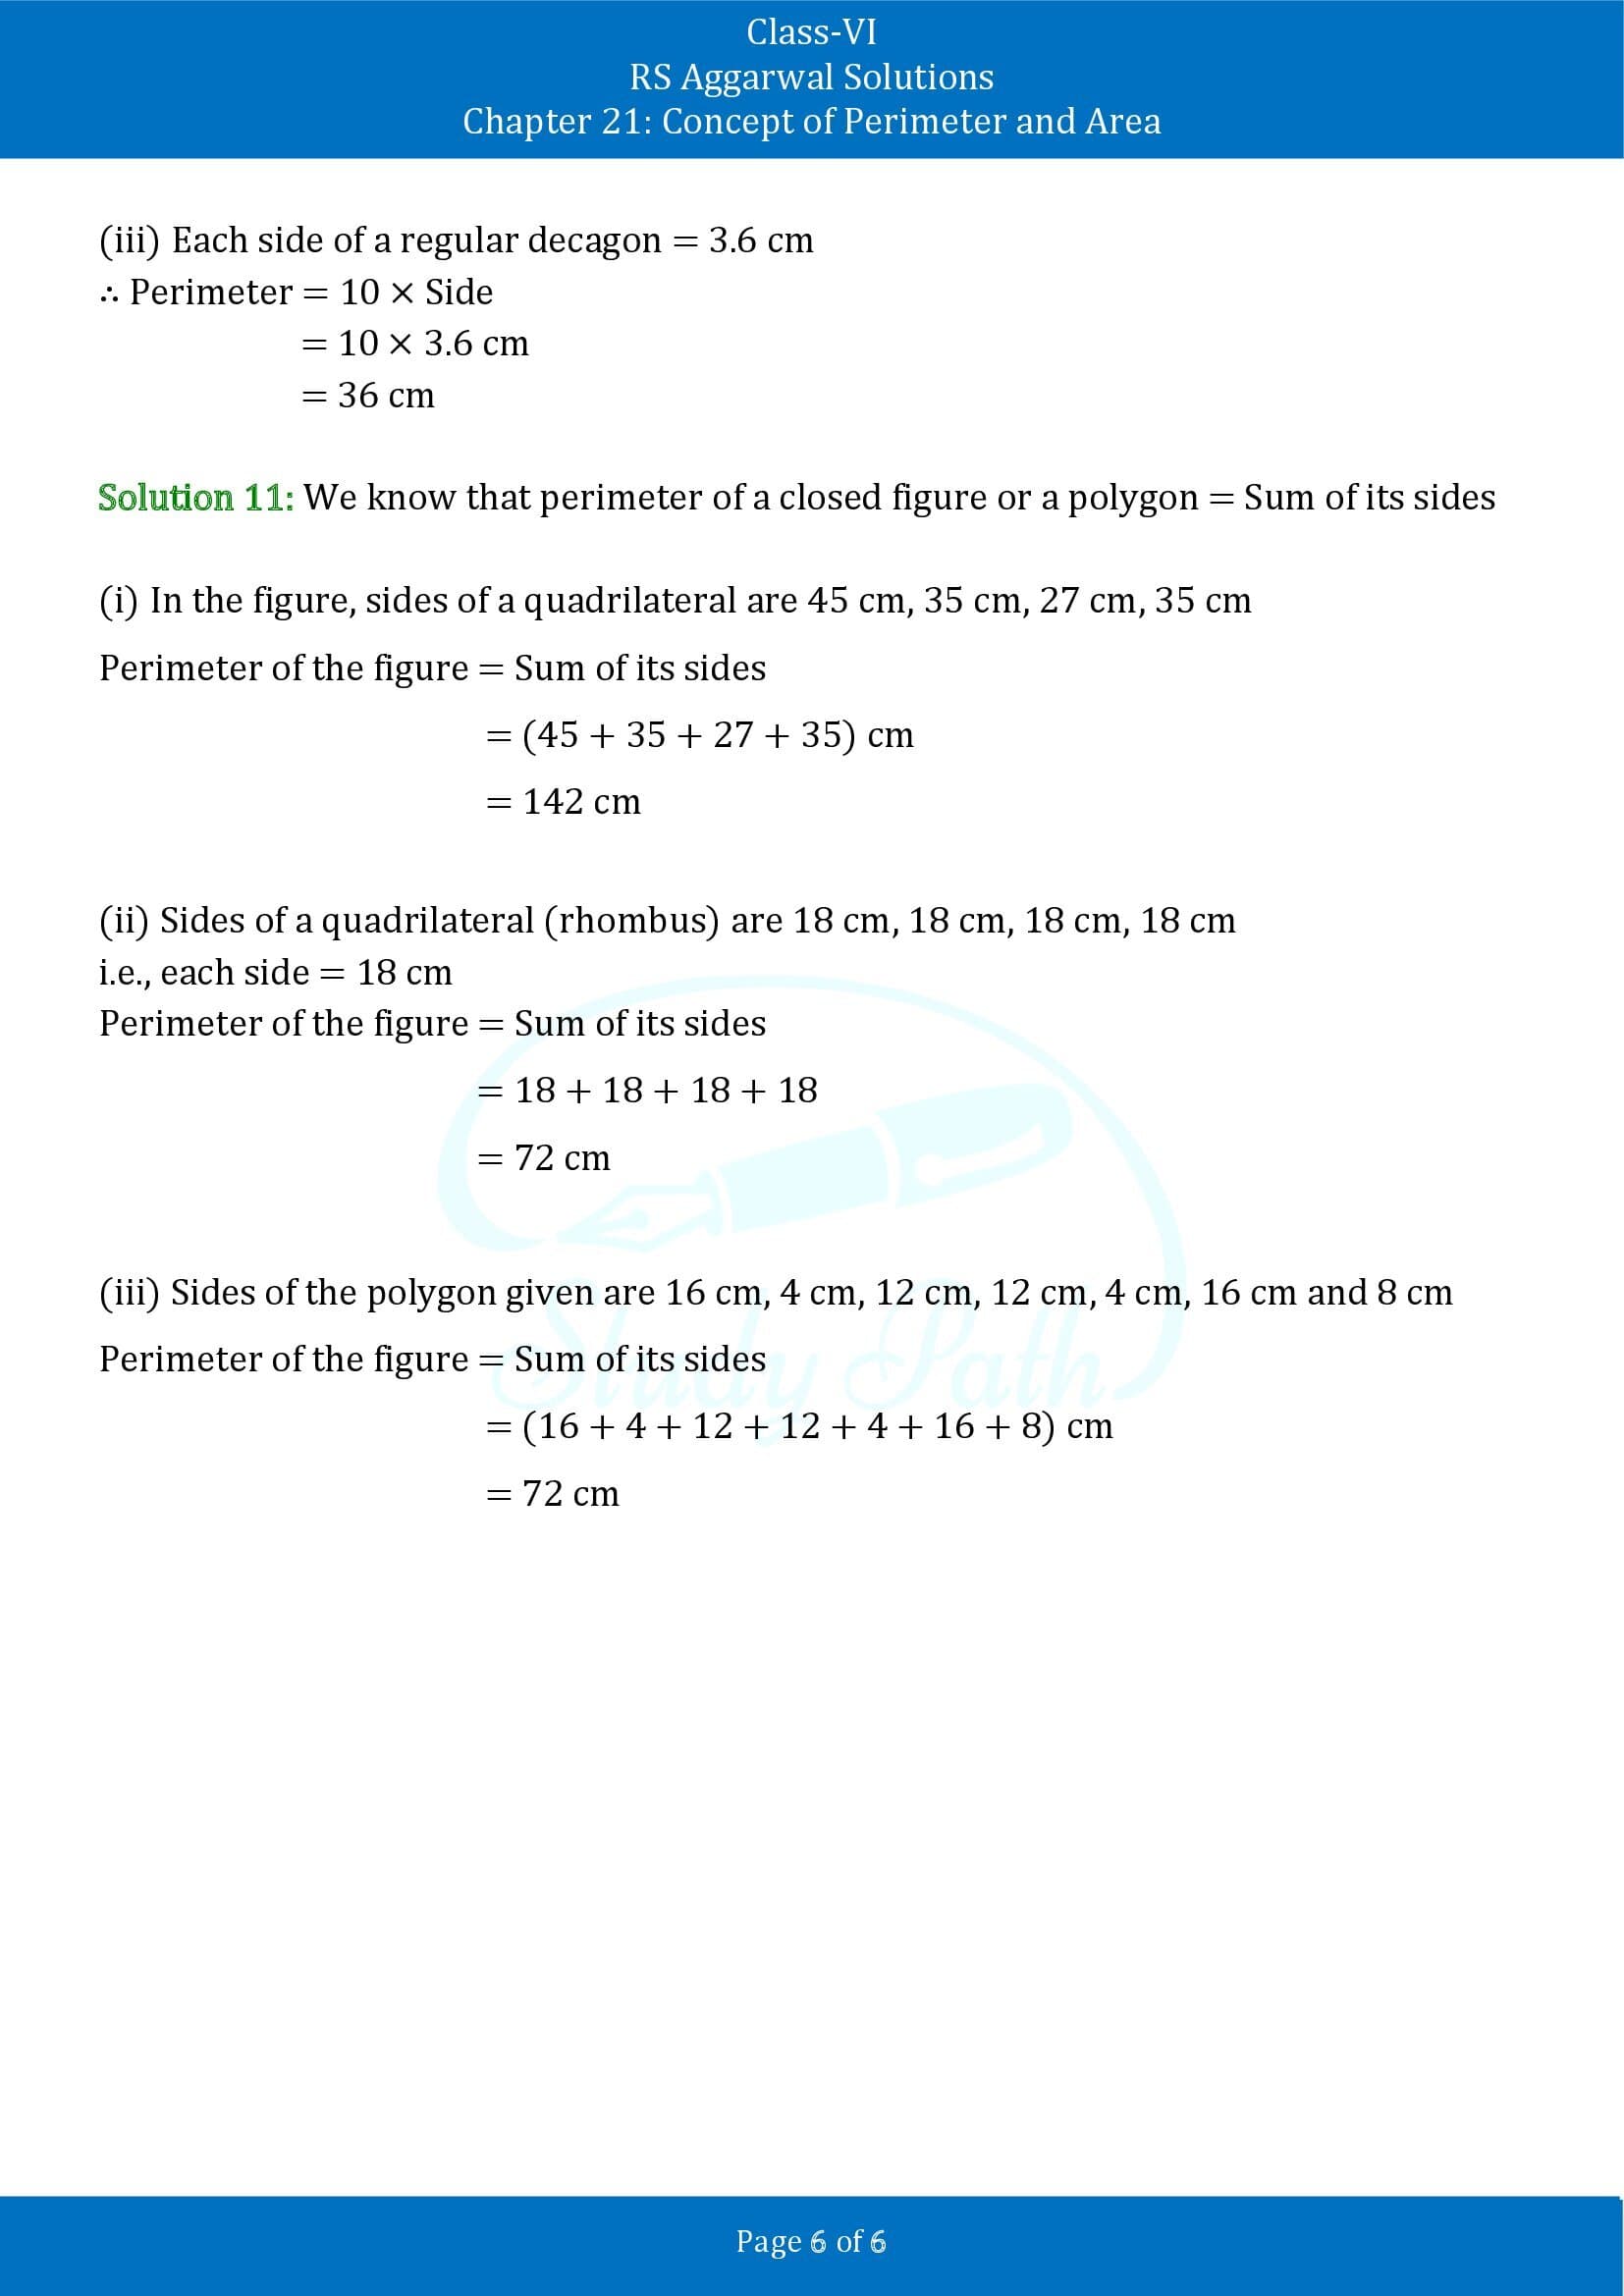 RS Aggarwal Solutions Class 6 Chapter 21 Concept of Perimeter and Area Exercise 21A 00006